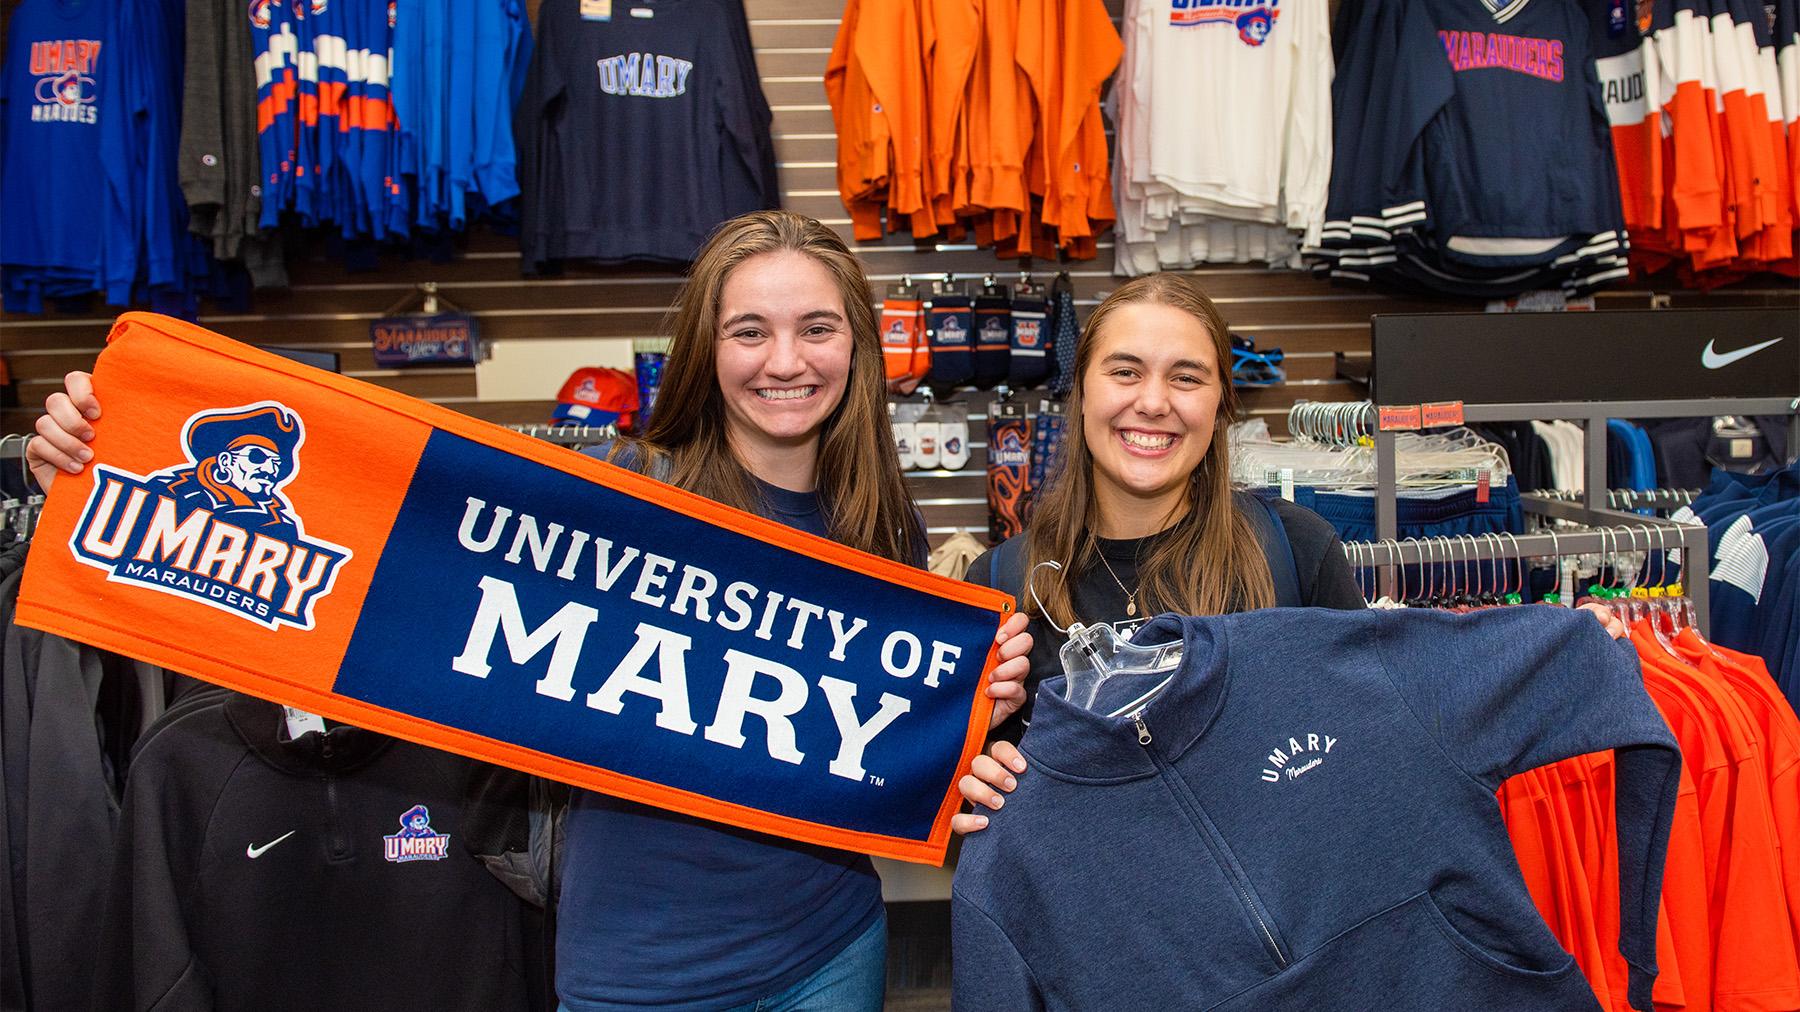 Students holding apparel in the bookstore